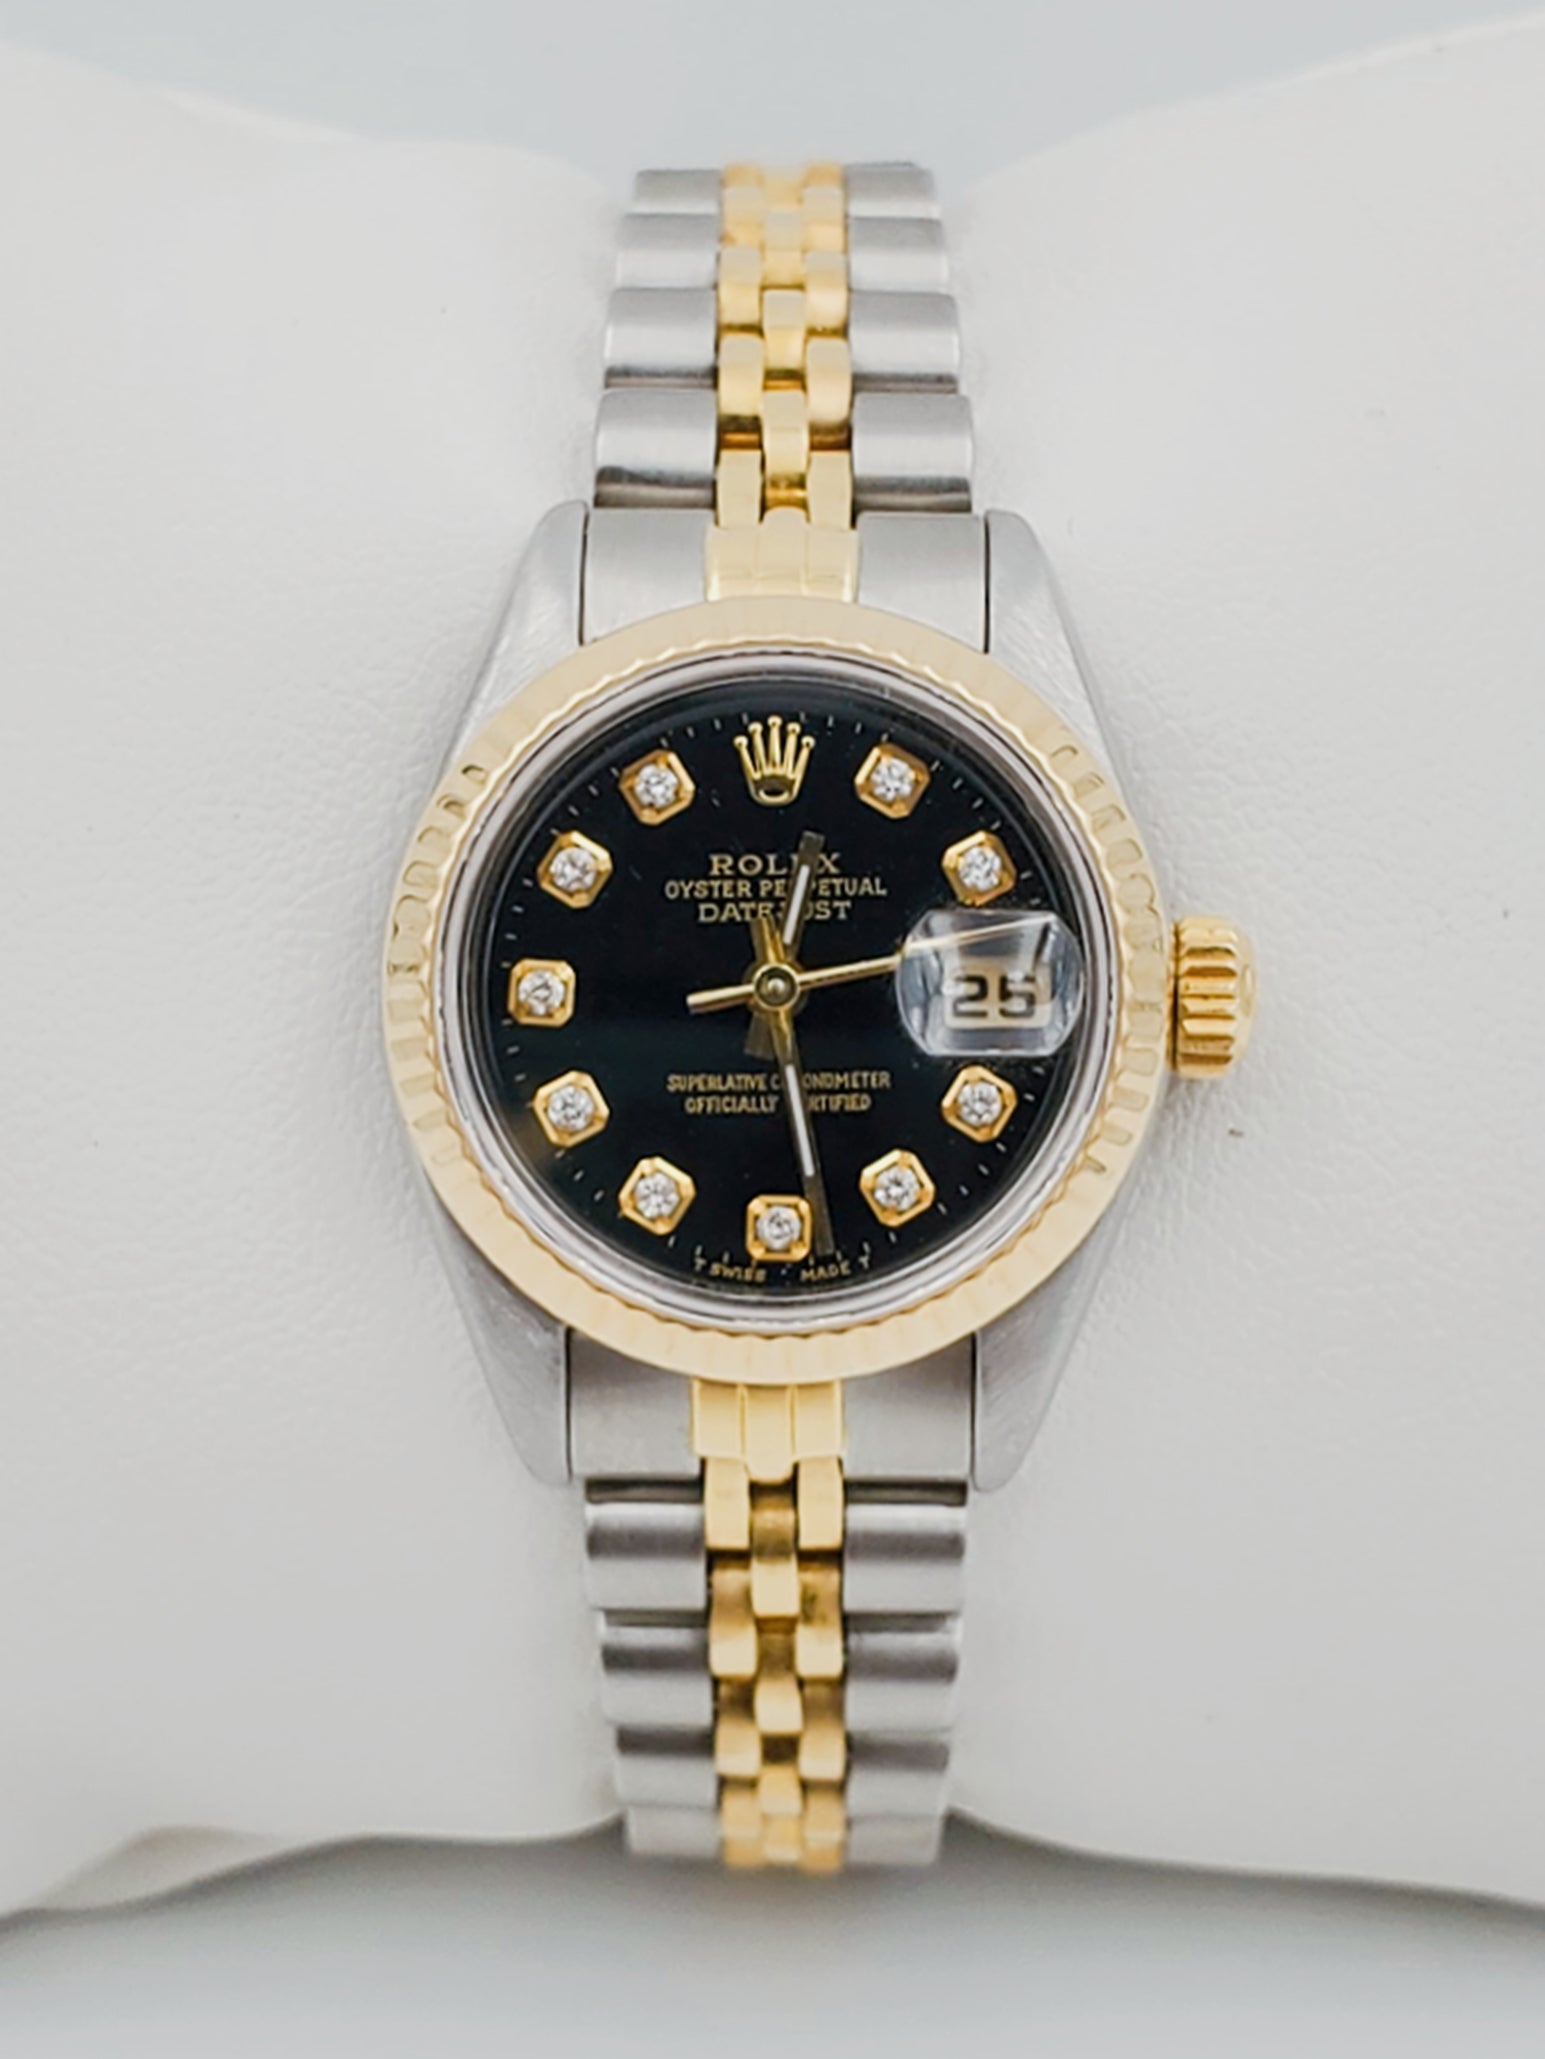 Ladies Rolex 26mm DateJust Two Tone 18K Gold / Stainless Steel Watch with Black Diamond Dial and Fluted Bezel. (Pre-Owned)